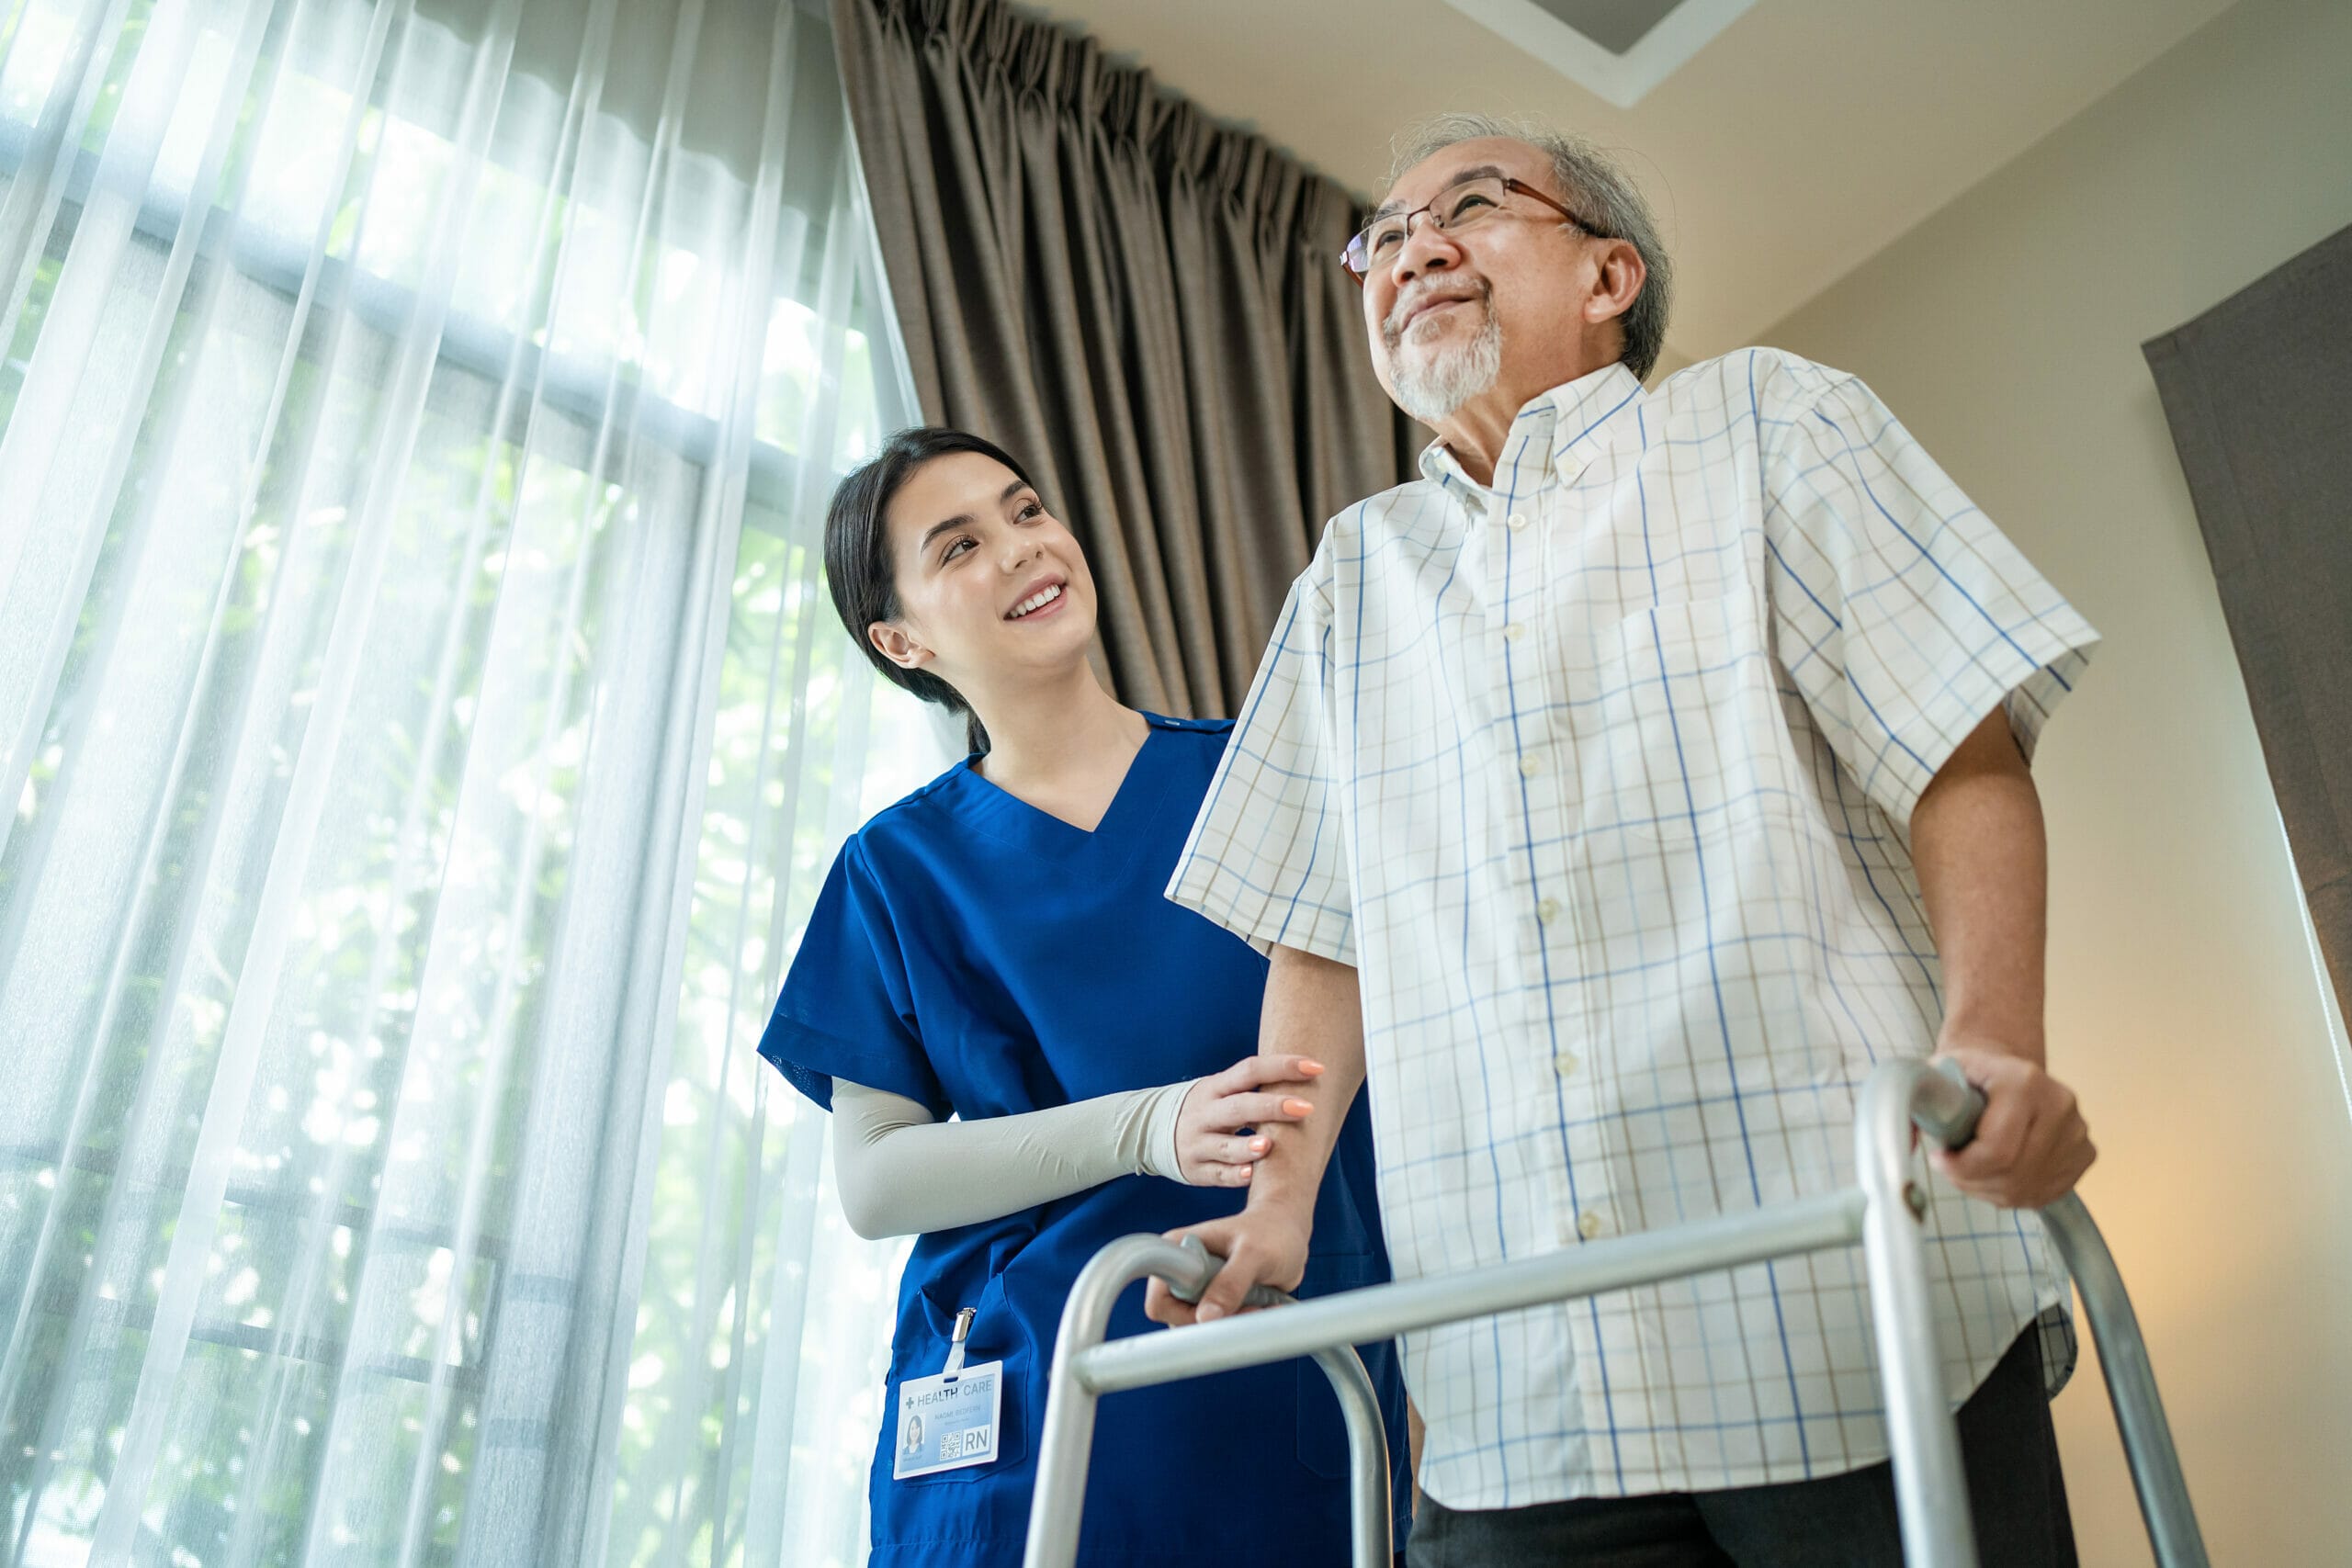 Jobs in Assisted Living Communities: What Candidates Want